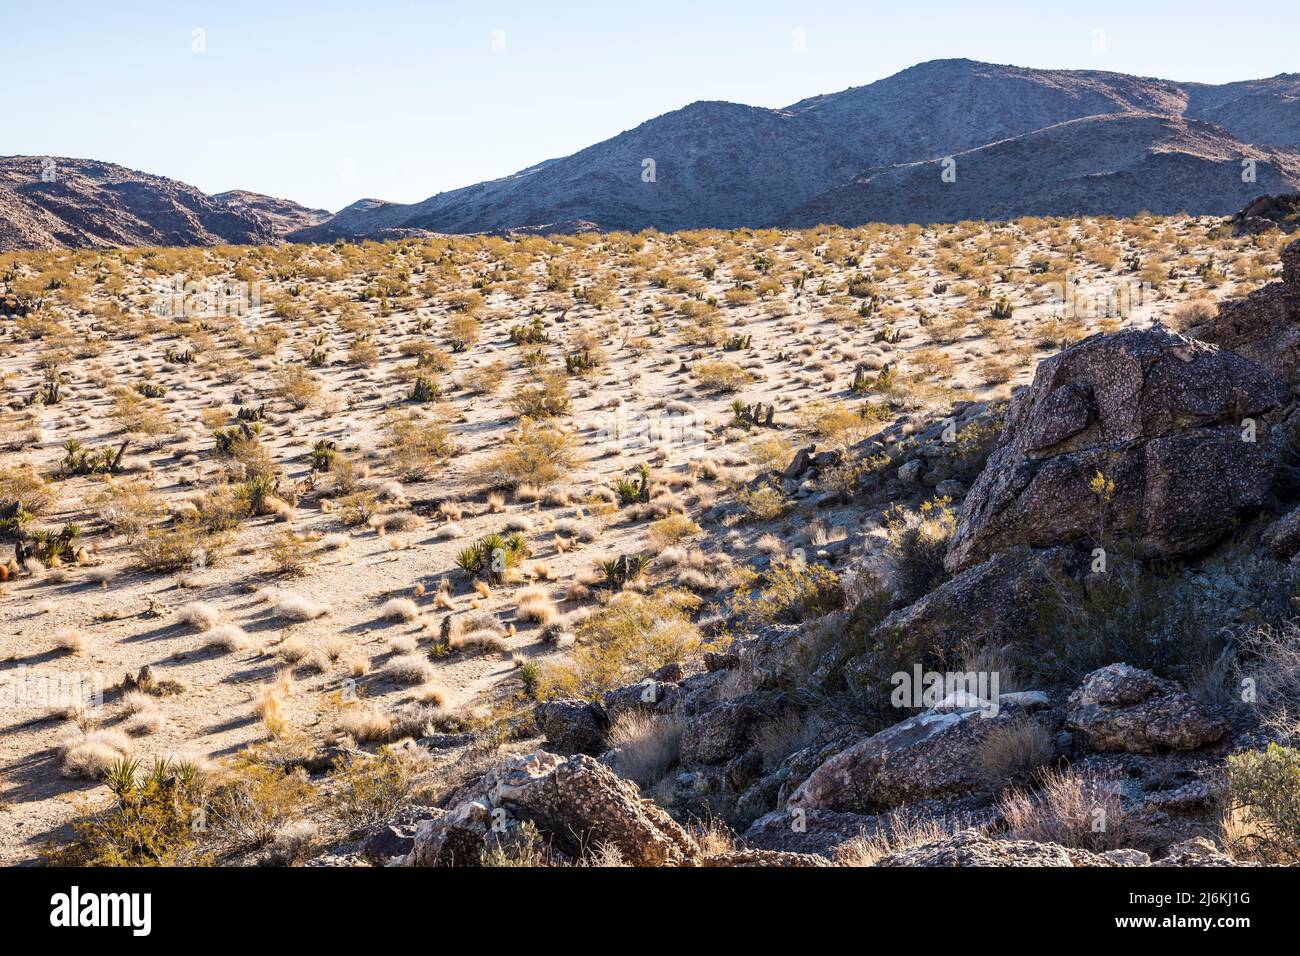 Mountains and Creosote flats near the Indian Cove entrance to Joshua Tree National Park. Stock Photo